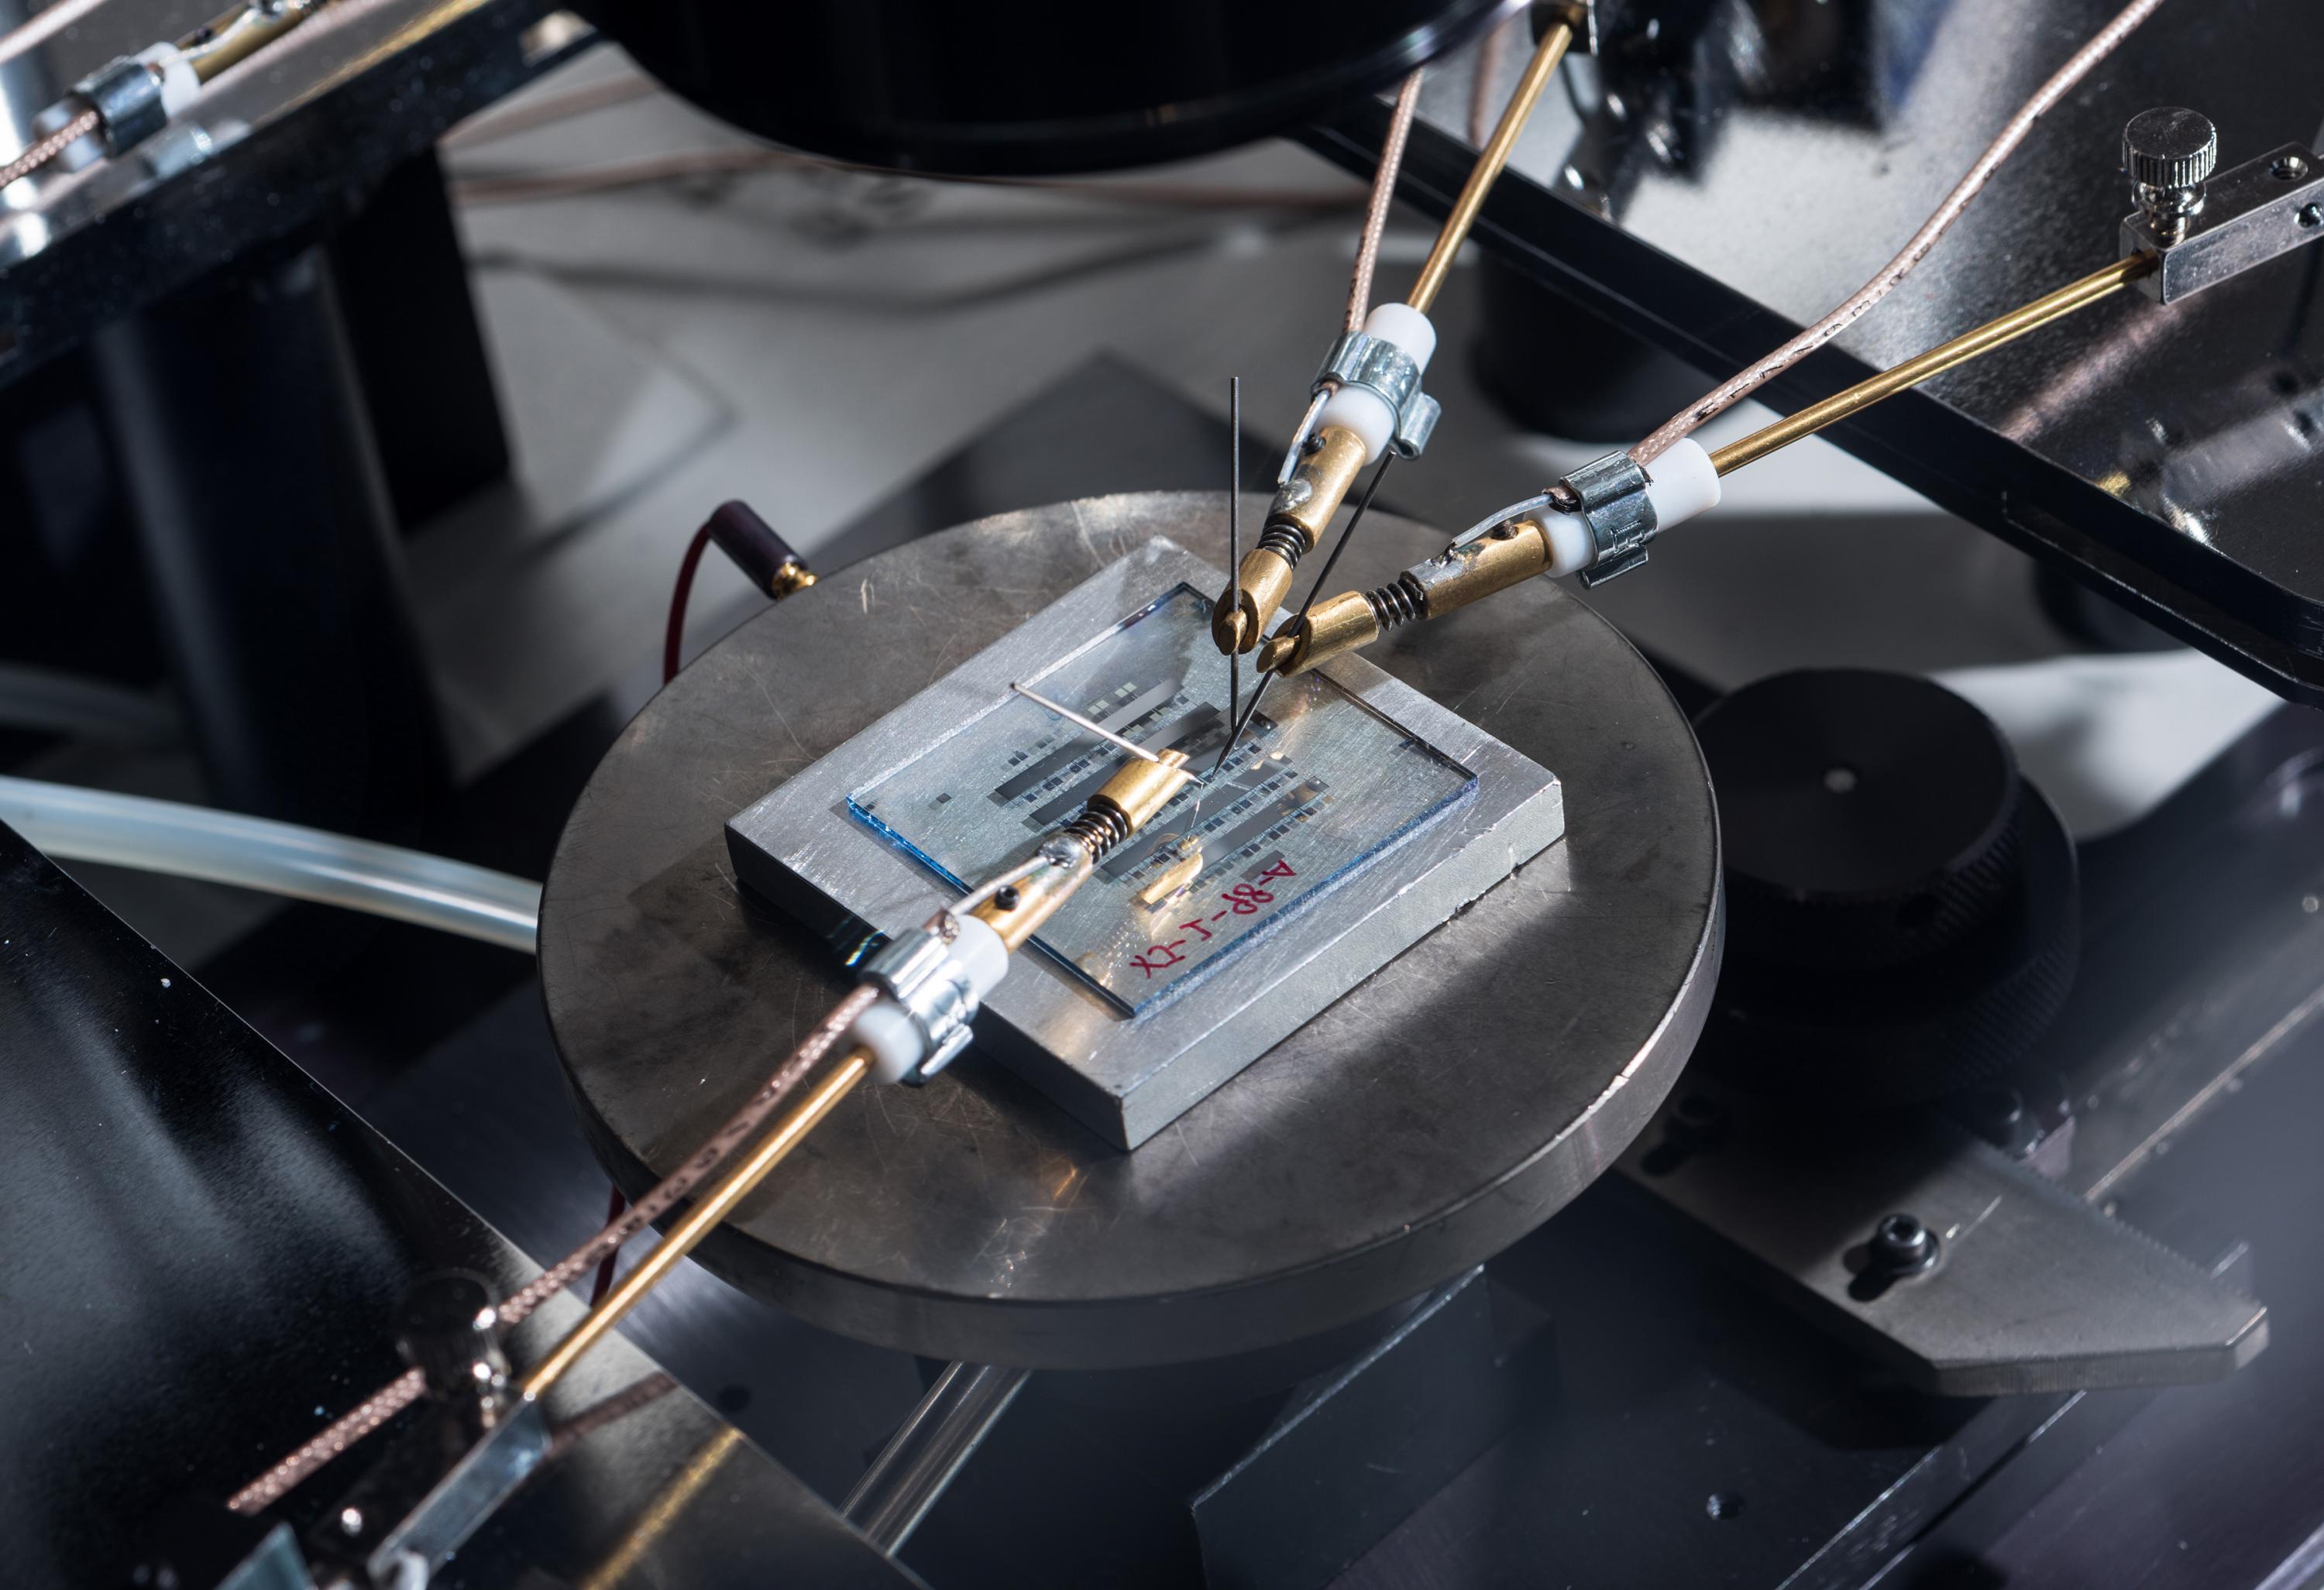 Image shows organic-thin film transistors for organic semiconductors under continuous testing on a probe station. (Photo Rob Felt Georgia Tech)